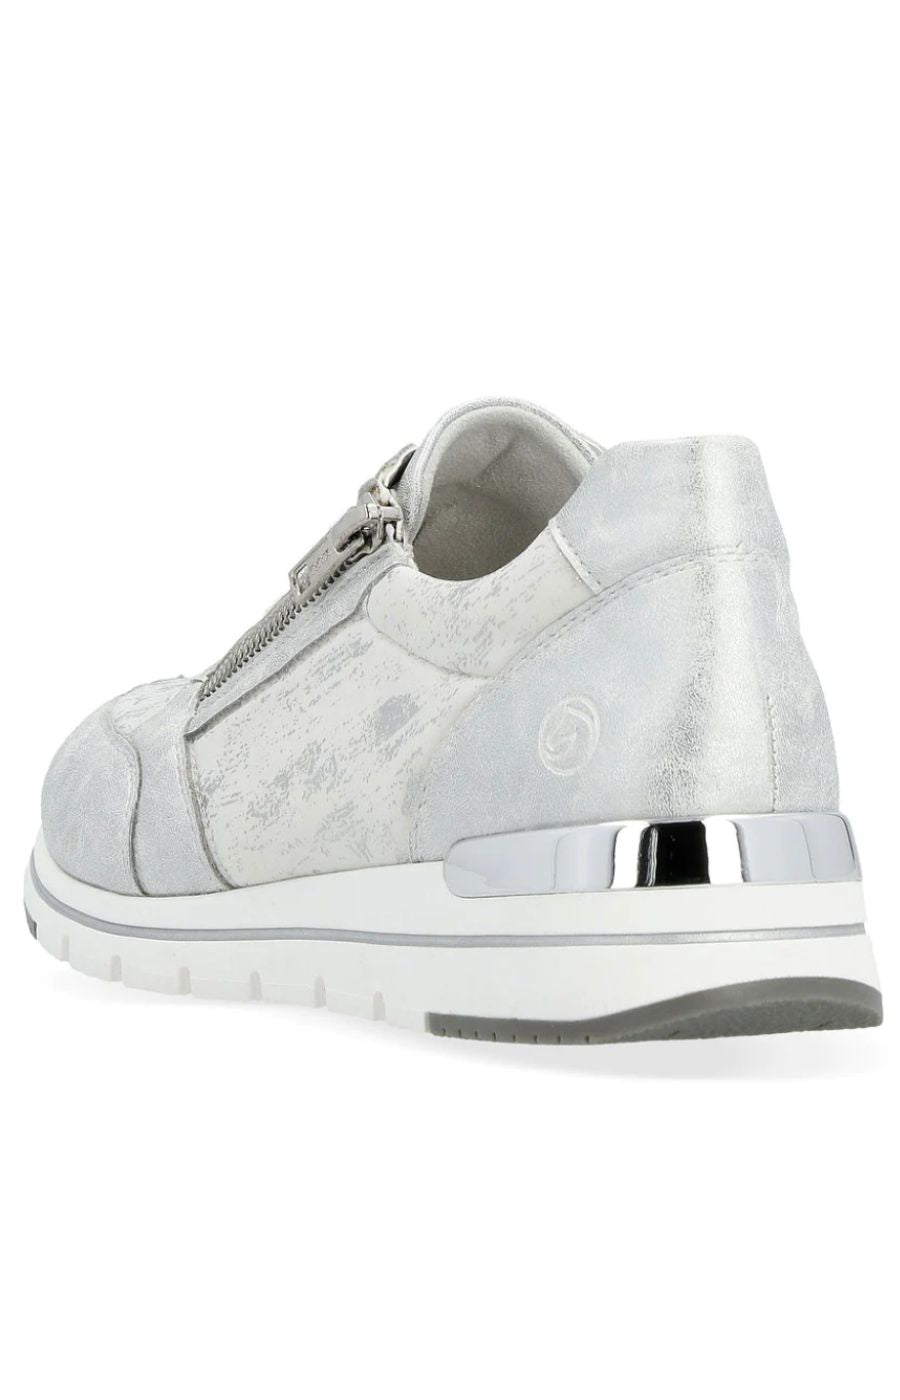 Remonte Wedged Trainer in Silver